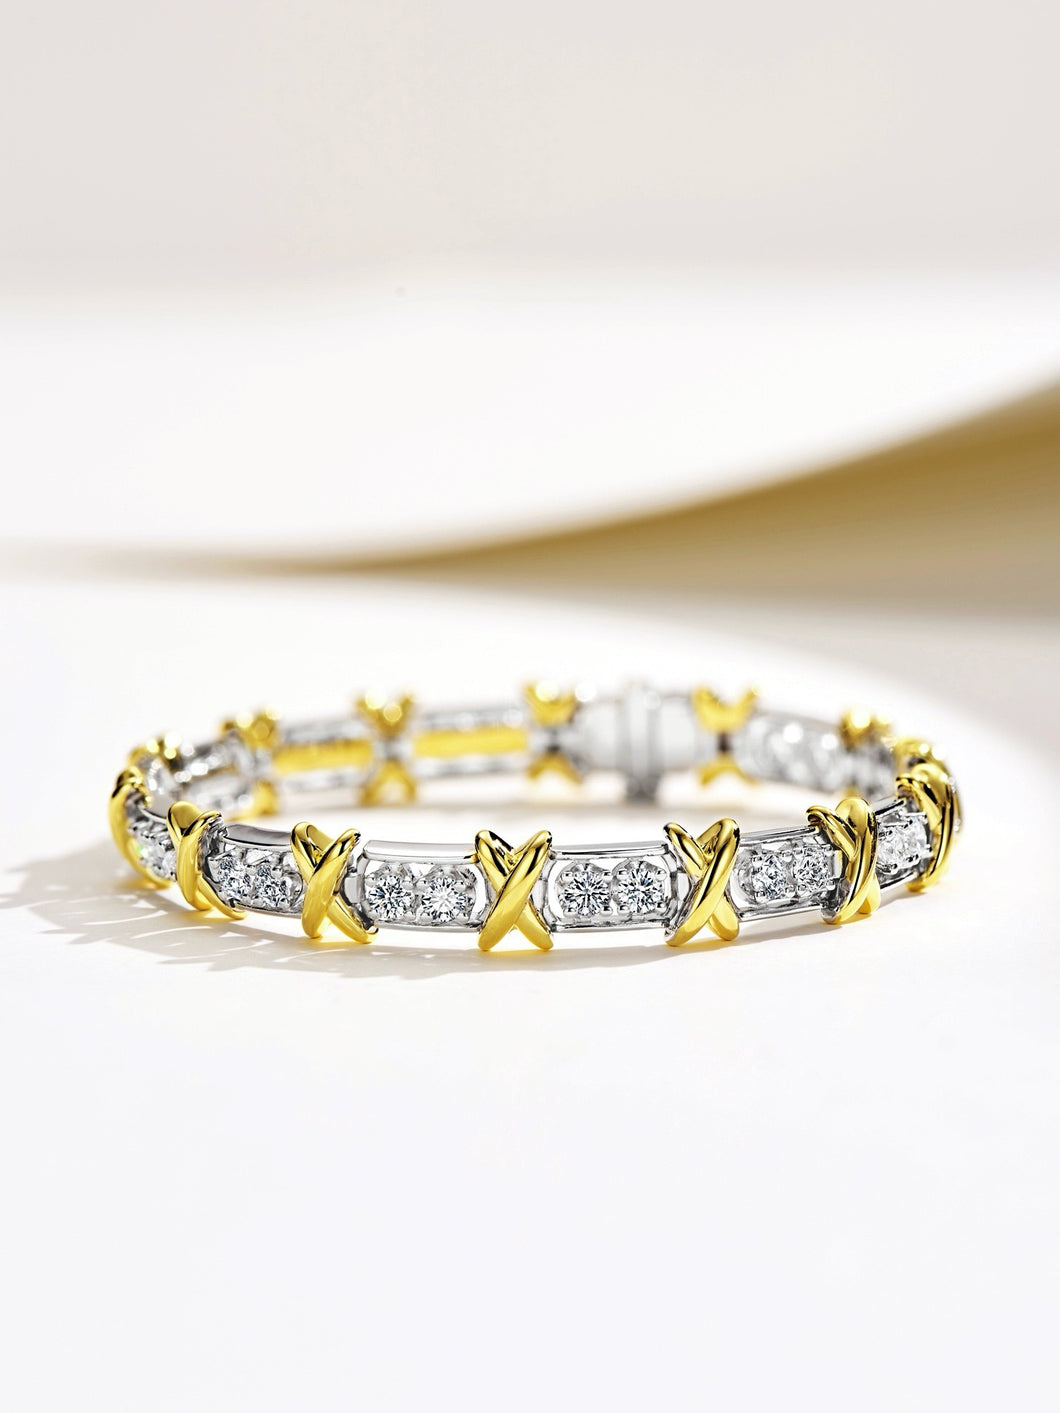 Interwoven Radiance: Natural Zircon and Yellow Gold Accented Silver-Plated Bracelet